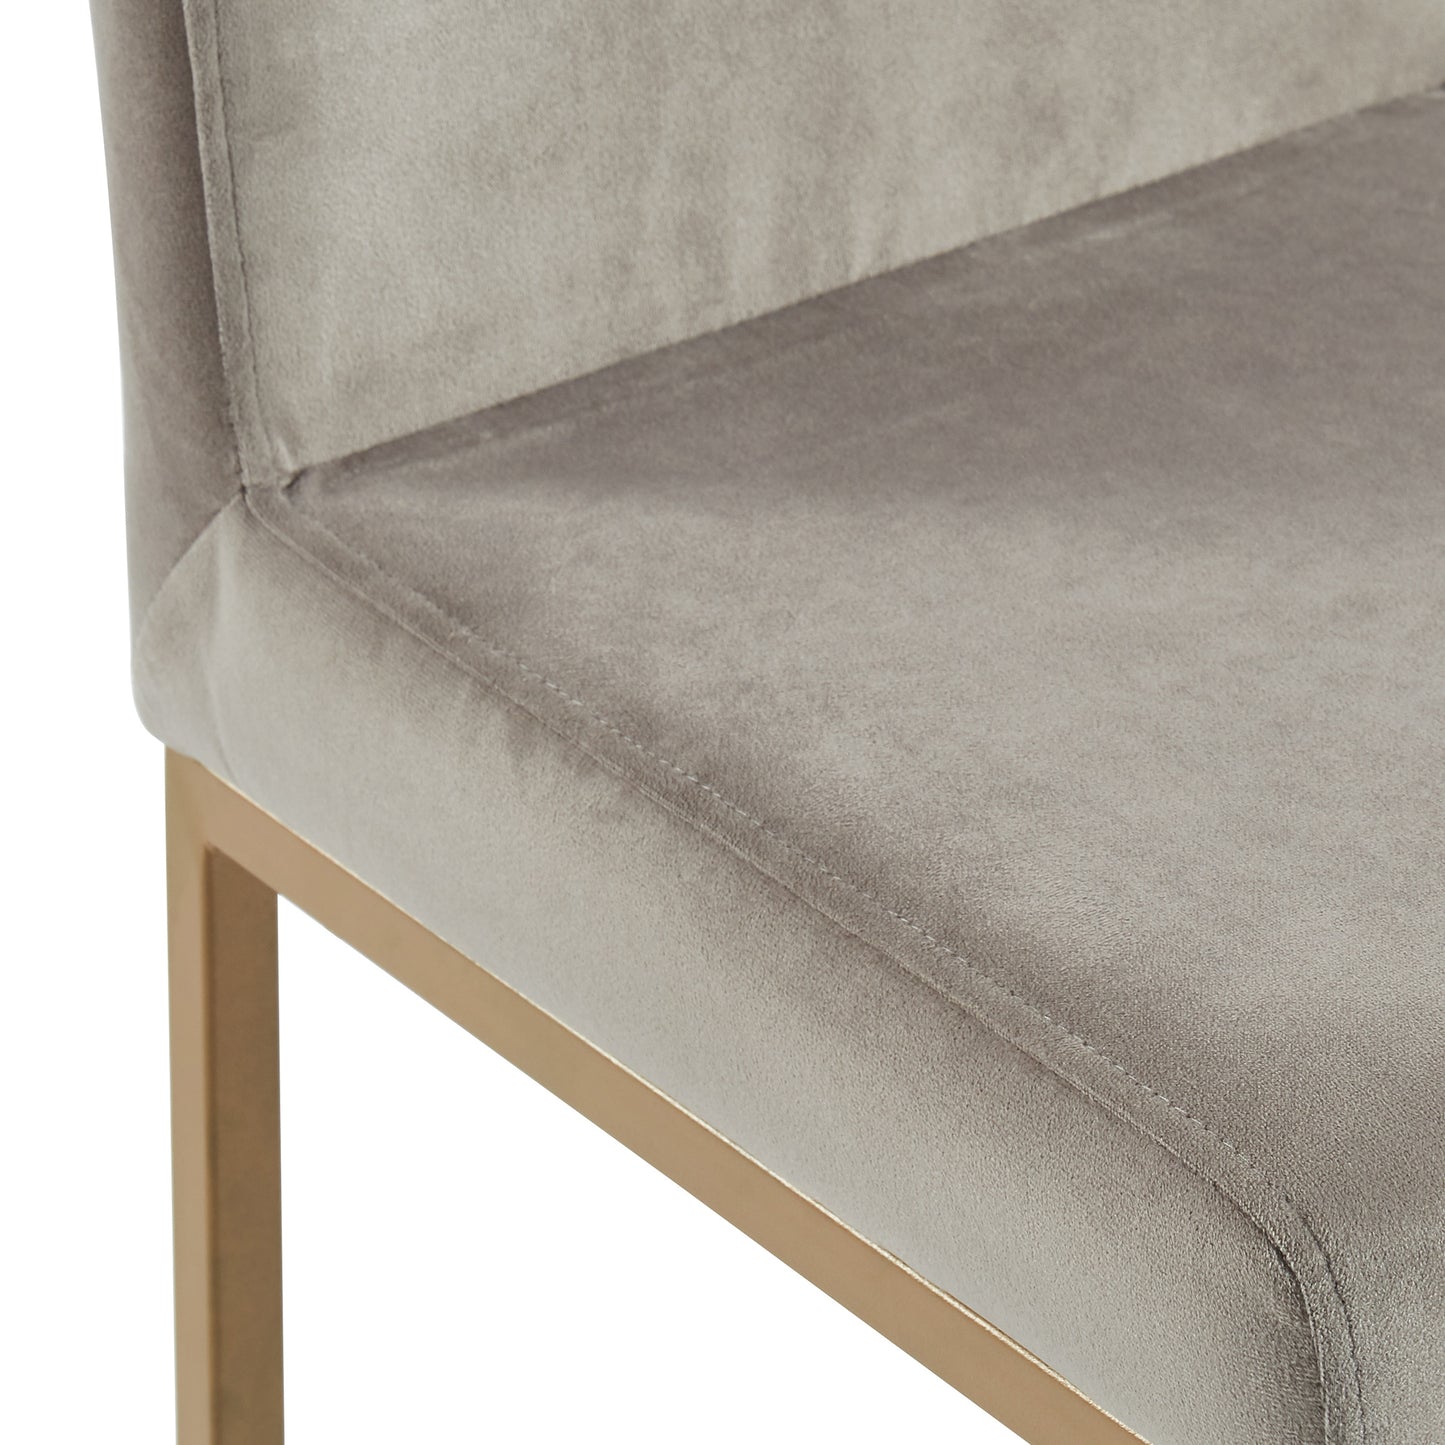 Diego Counter Stool - Grey/Gold